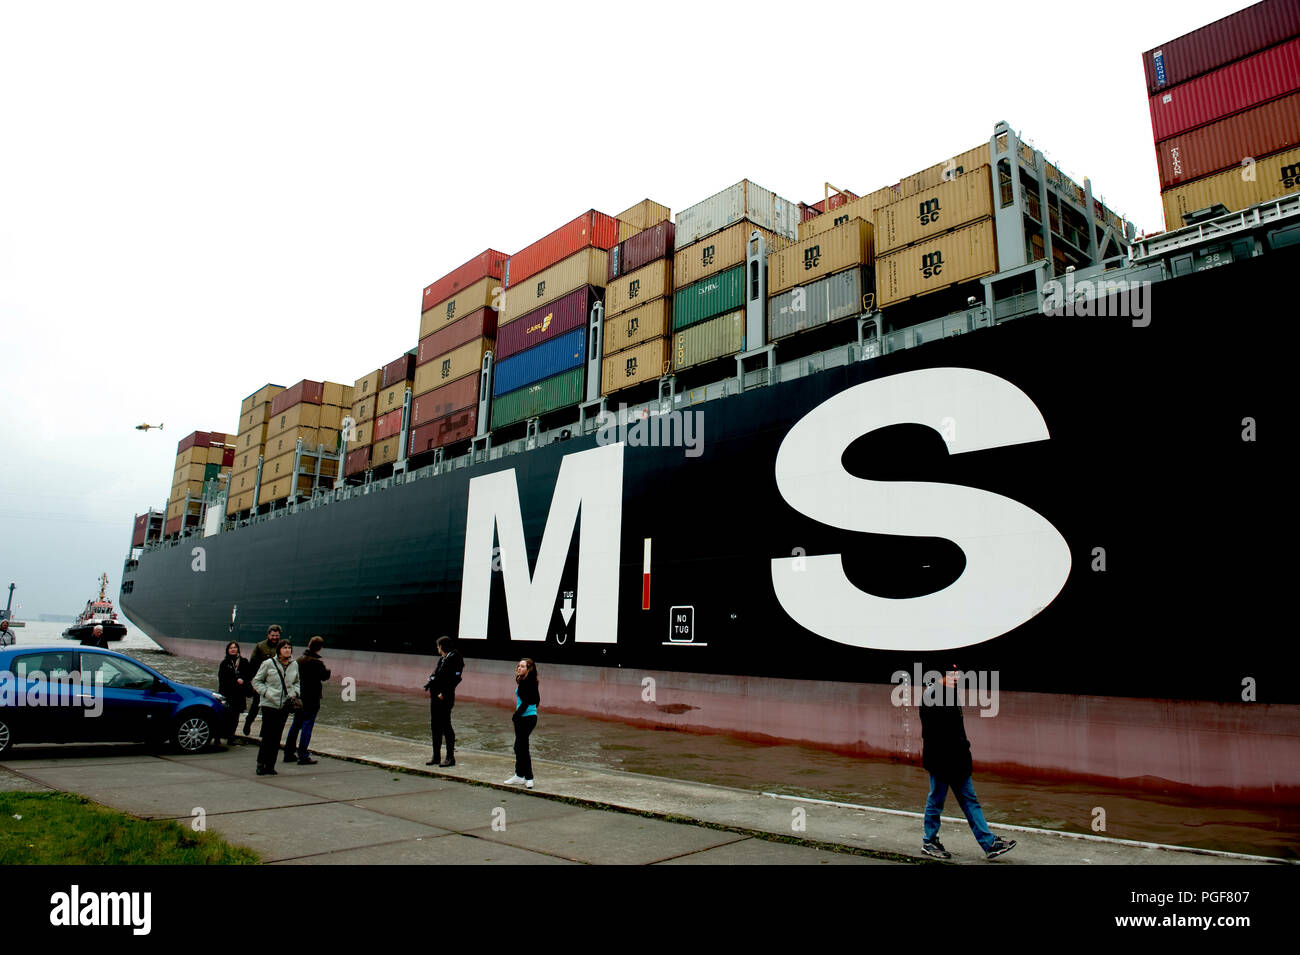 The MSB Beatrice, biggest containership in the world, entering the port of Antwerp (Belgium, 07/04/2009) Stock Photo